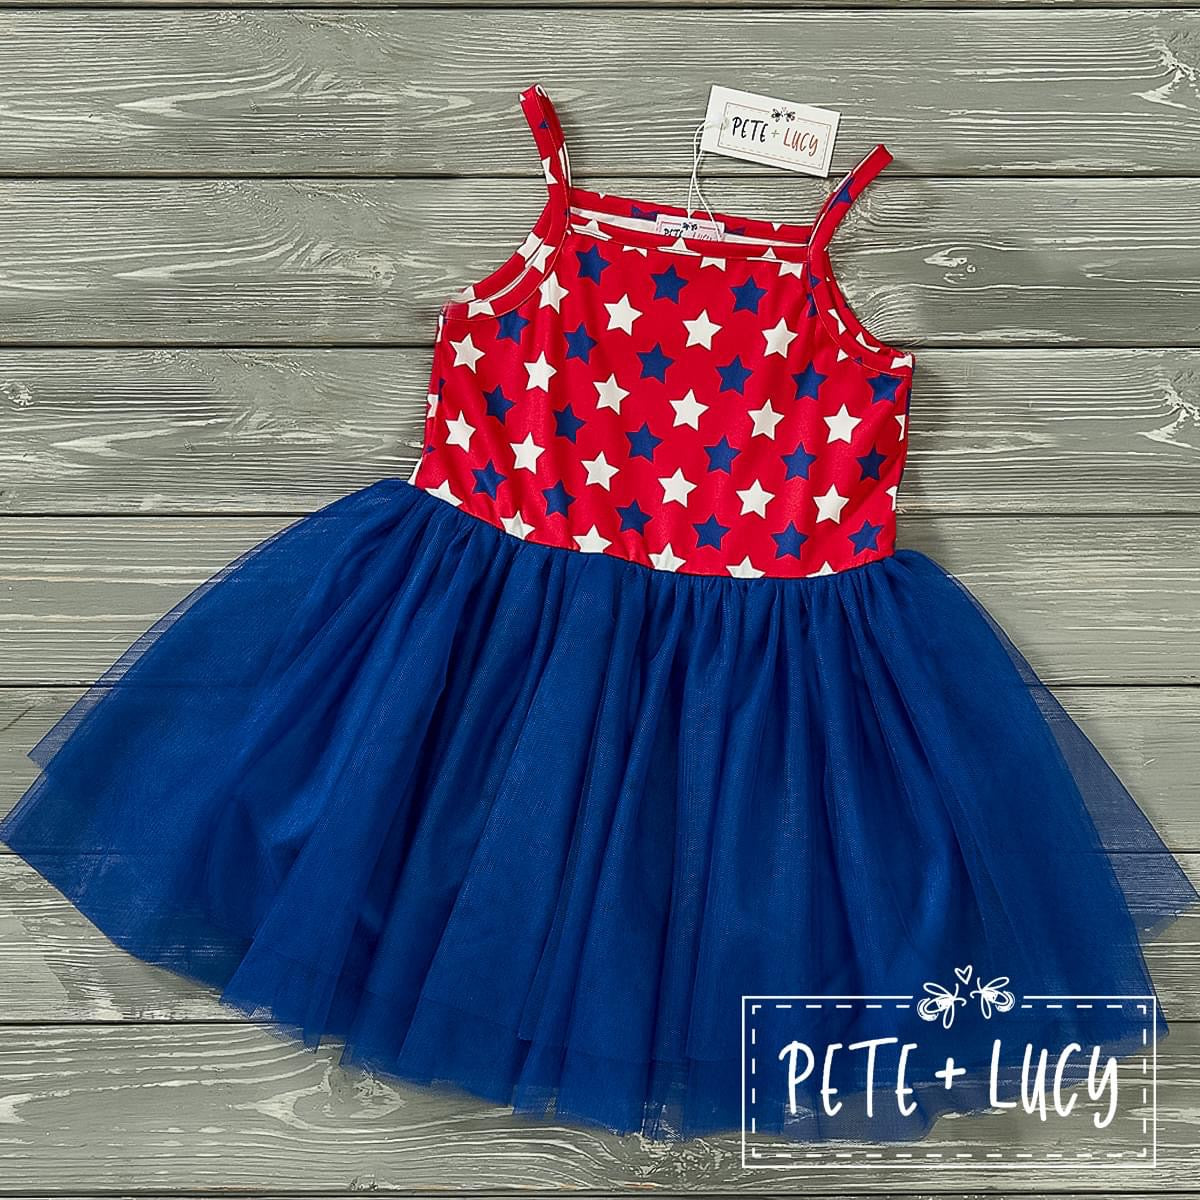 Home of the Brave Tulle Dress by Pete and Lucy